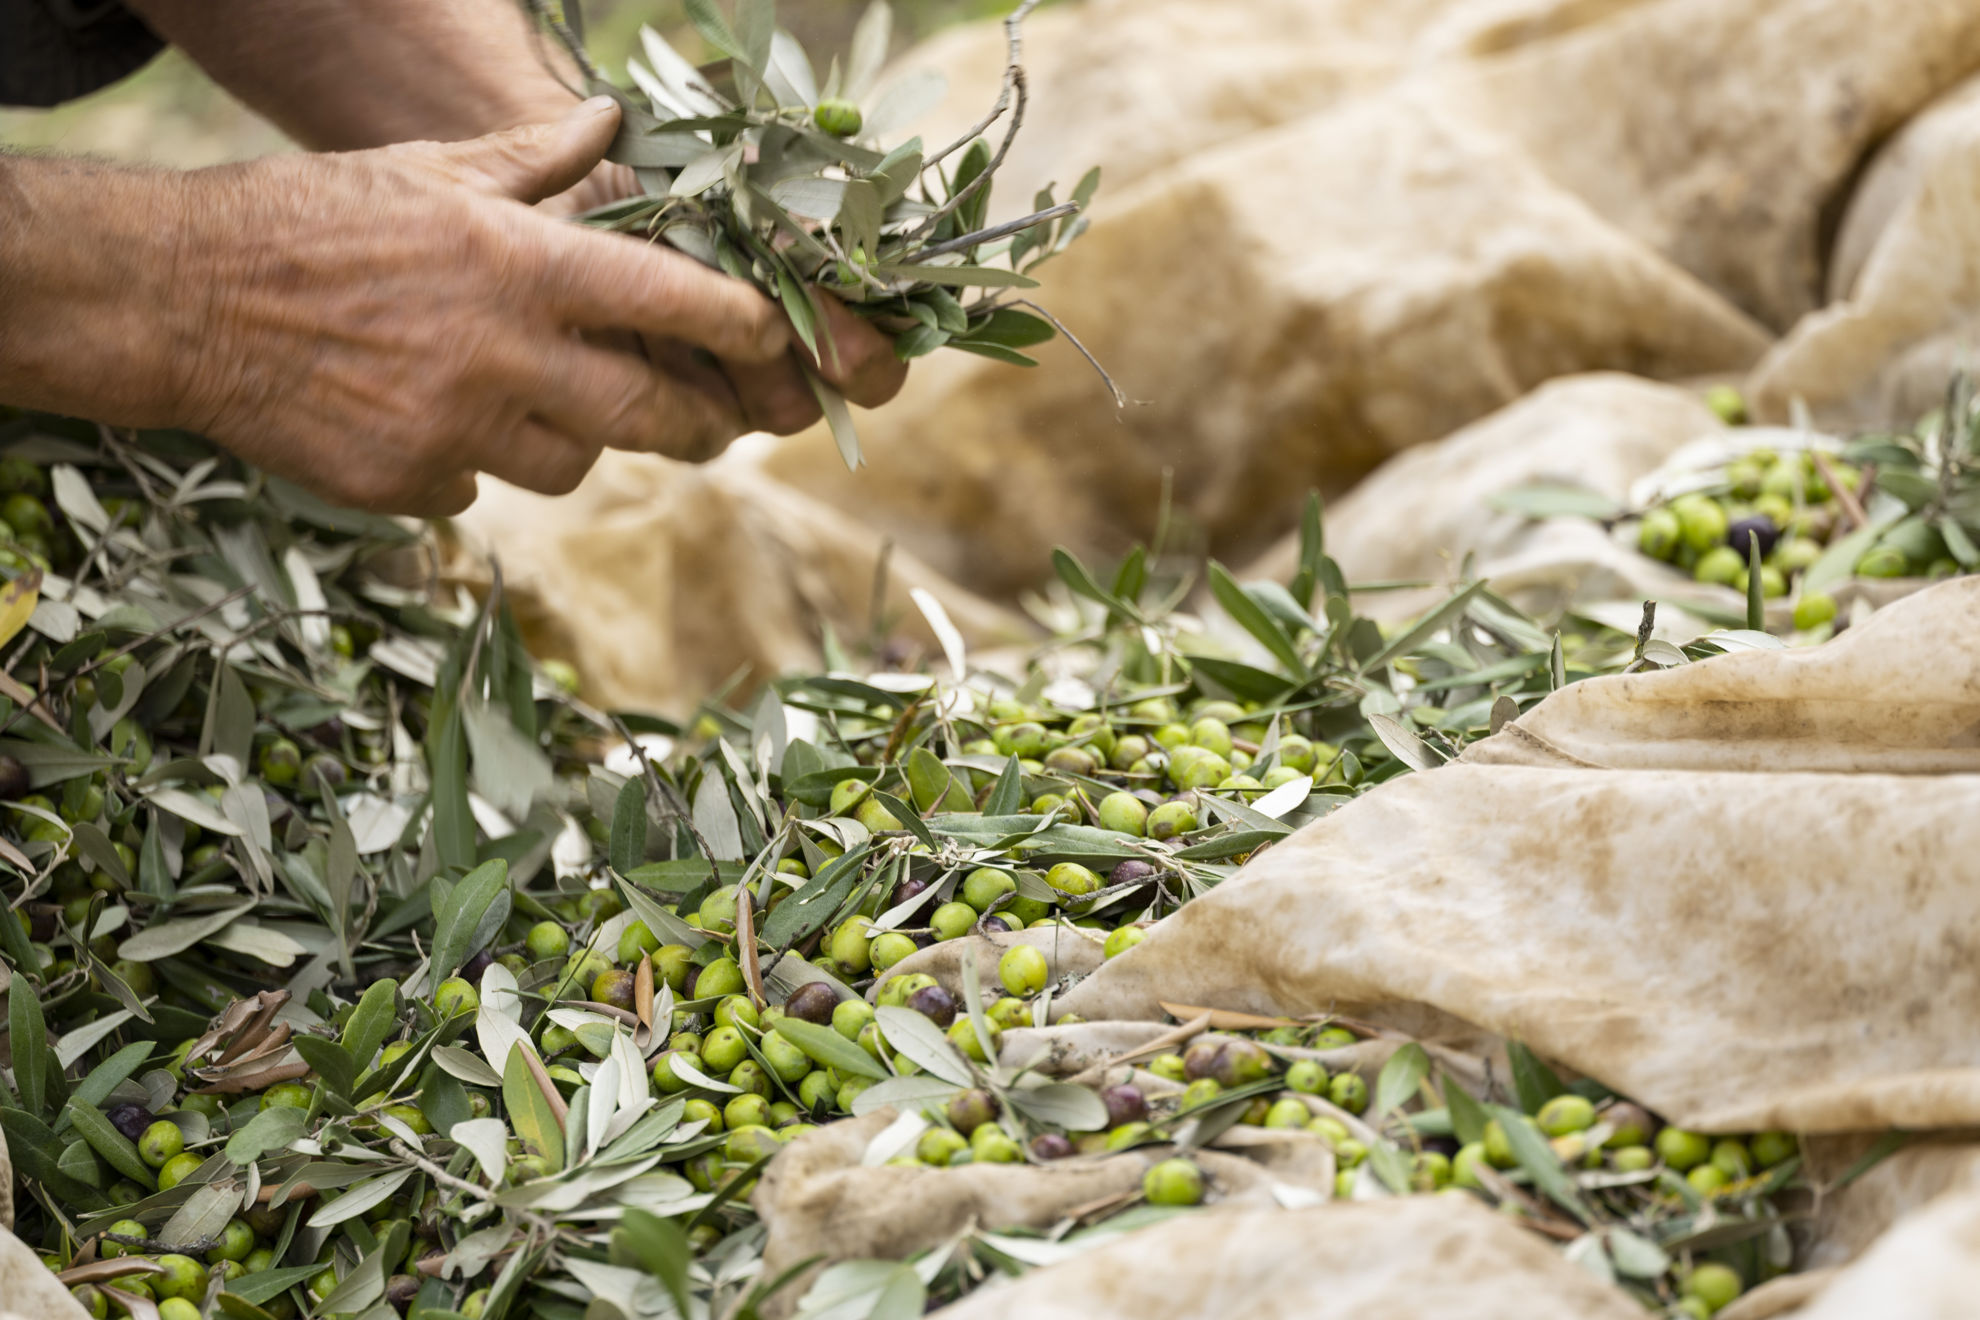 Guide to the Art of Olive Cultivation